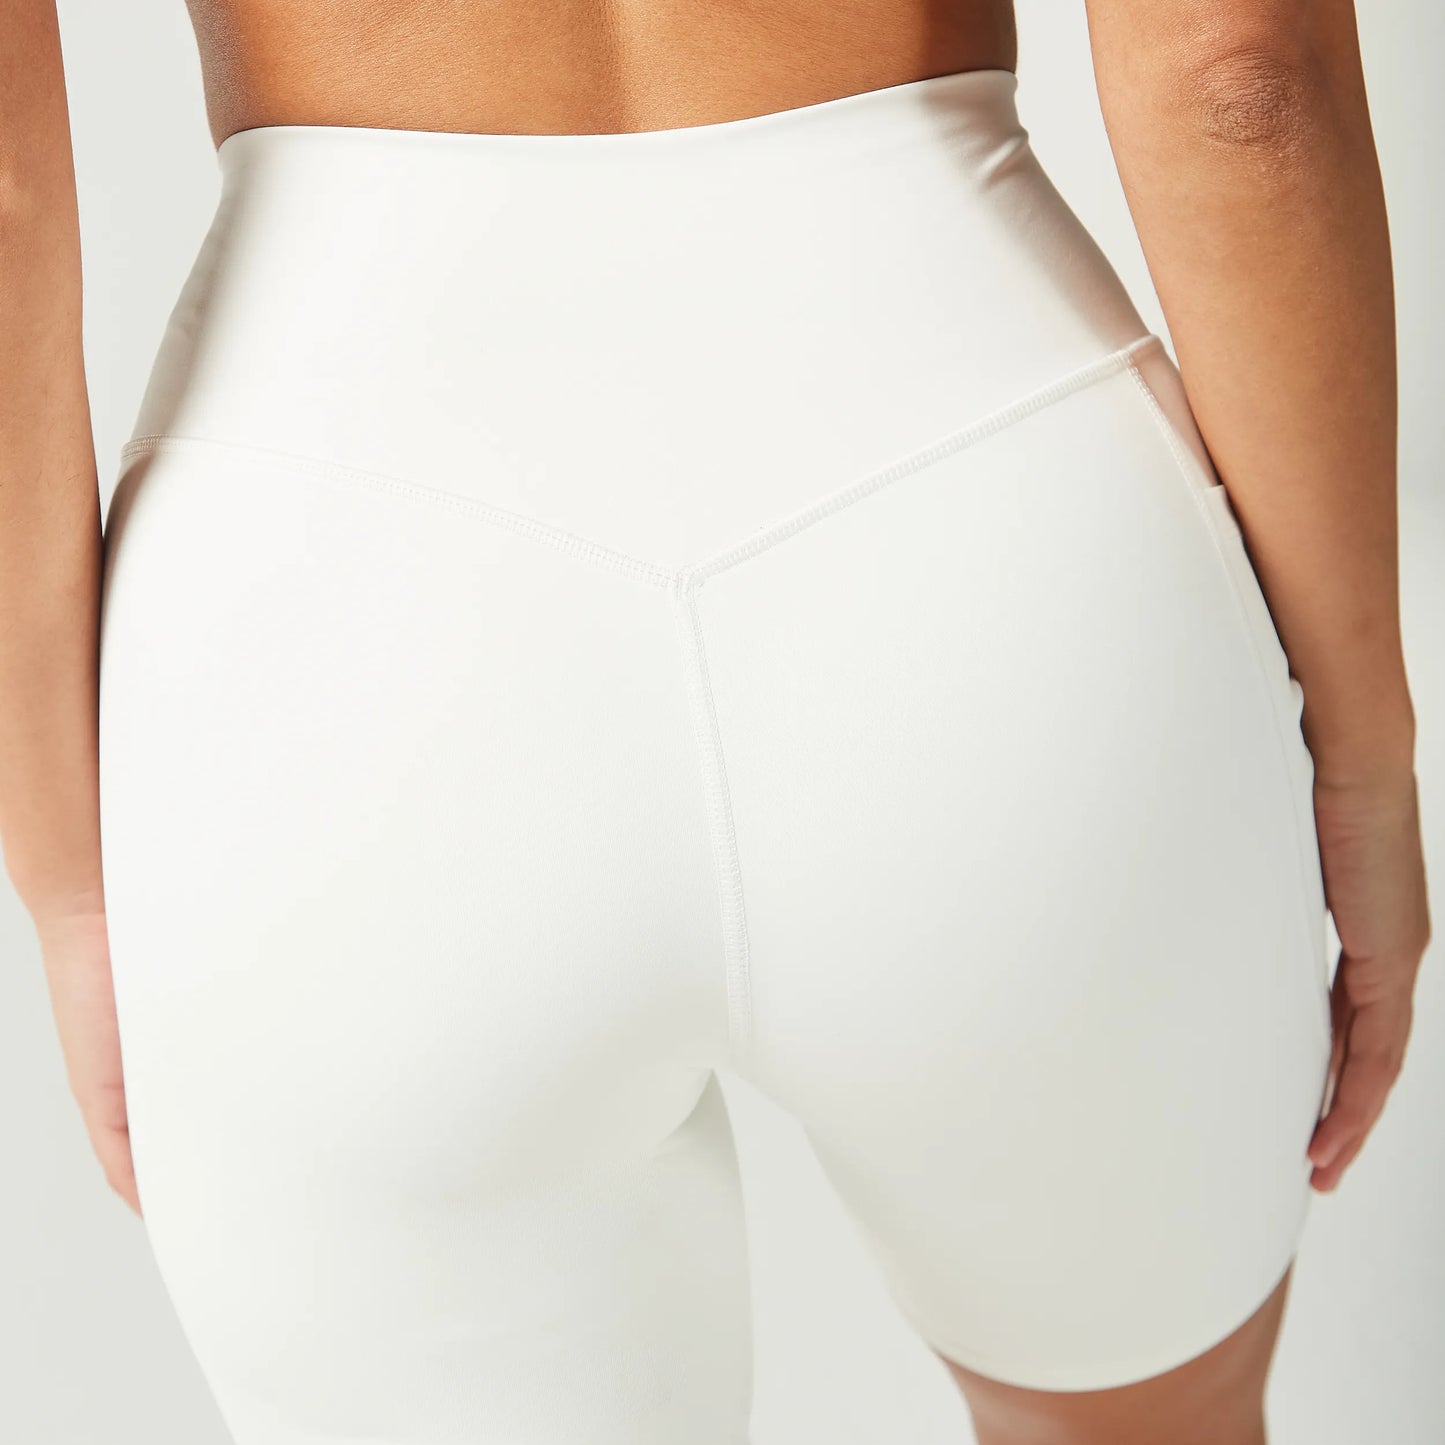 Essential ACT 7" Double Layered Cycling Shorts - Pearl White